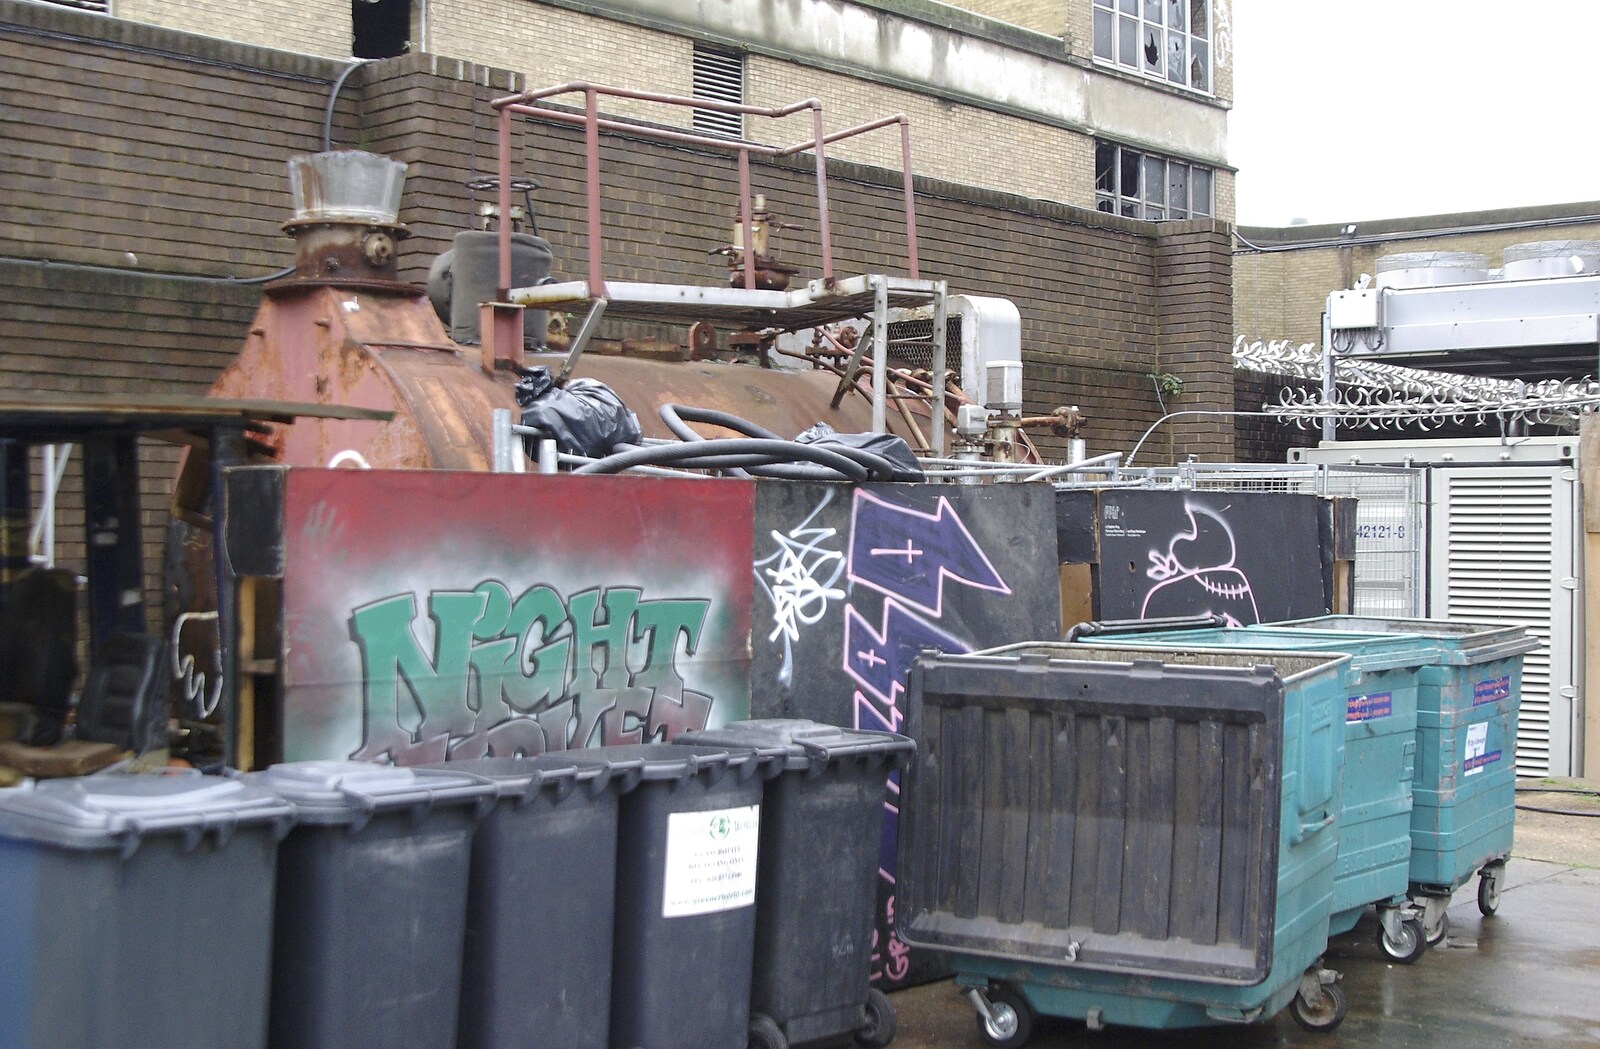 More graffiti, wheelie bins and a pile of junk from From East End to East Coast: Brick Lane and Walberswick, London and Suffolk - 9th February 2007